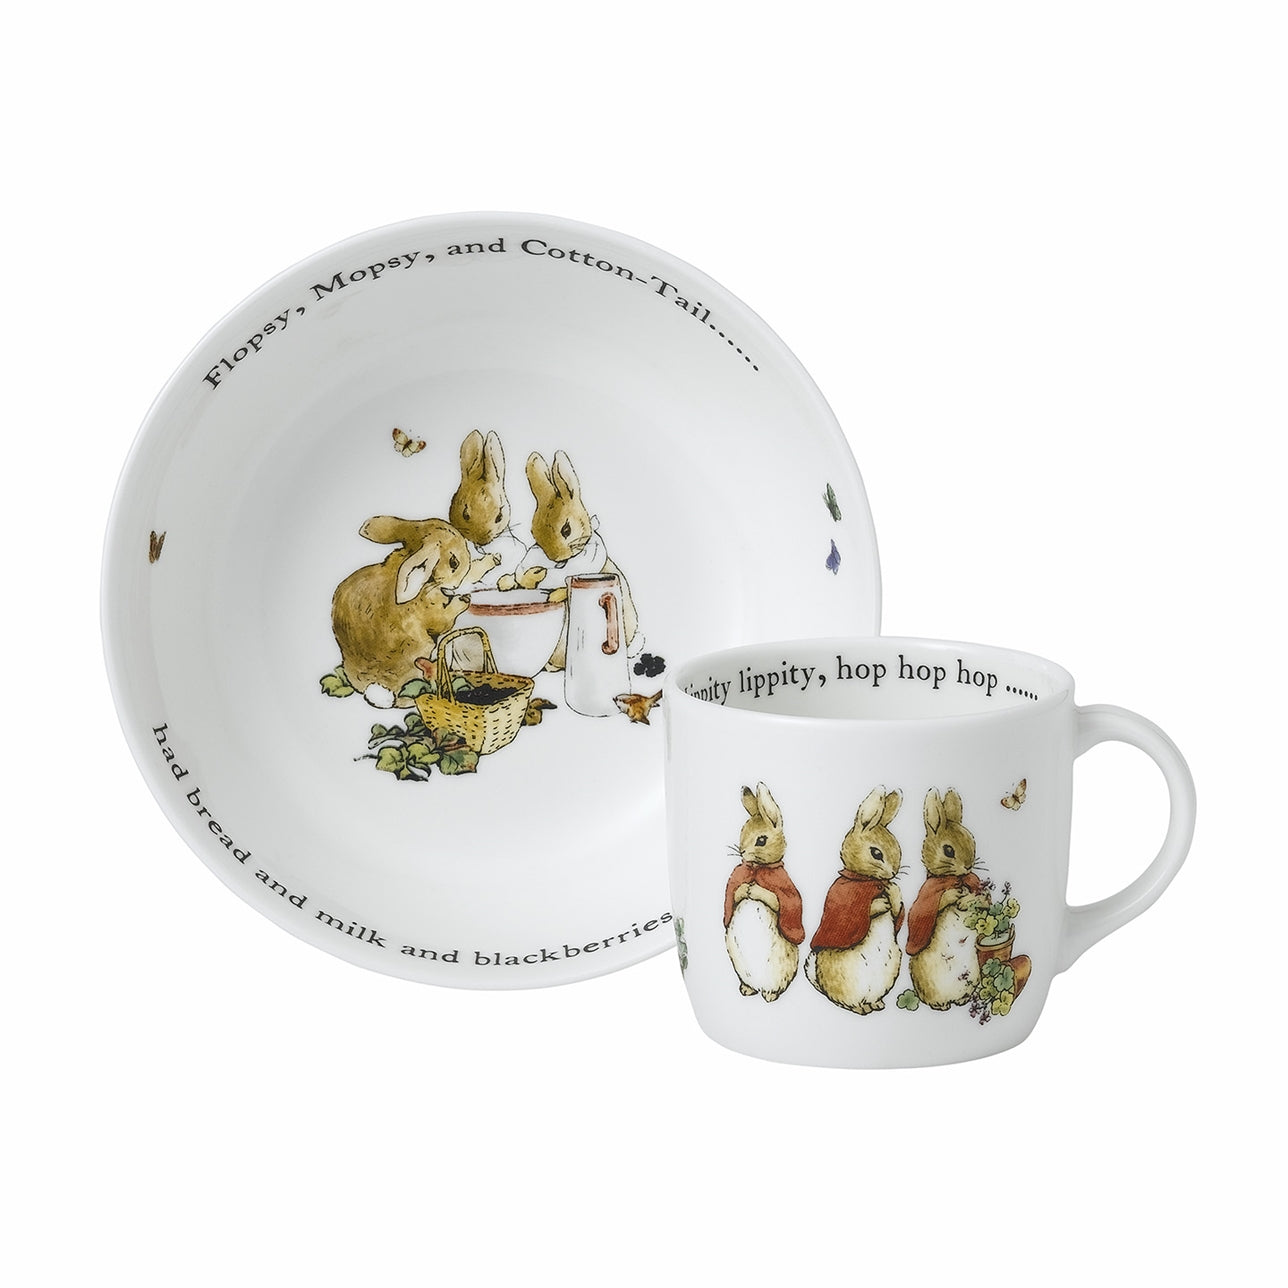 Wedgwood Flopsy, Mopsy and Cottontail 2 Piece Set  Unlock the curious imaginations of children in your life with Beatrix Potter’s cute trio Flopsy, Mopsy and Cottontail. This 2-piece set includes a fine bone china bowl and mug and features the three sisters of Peter Rabbit across all three pieces.